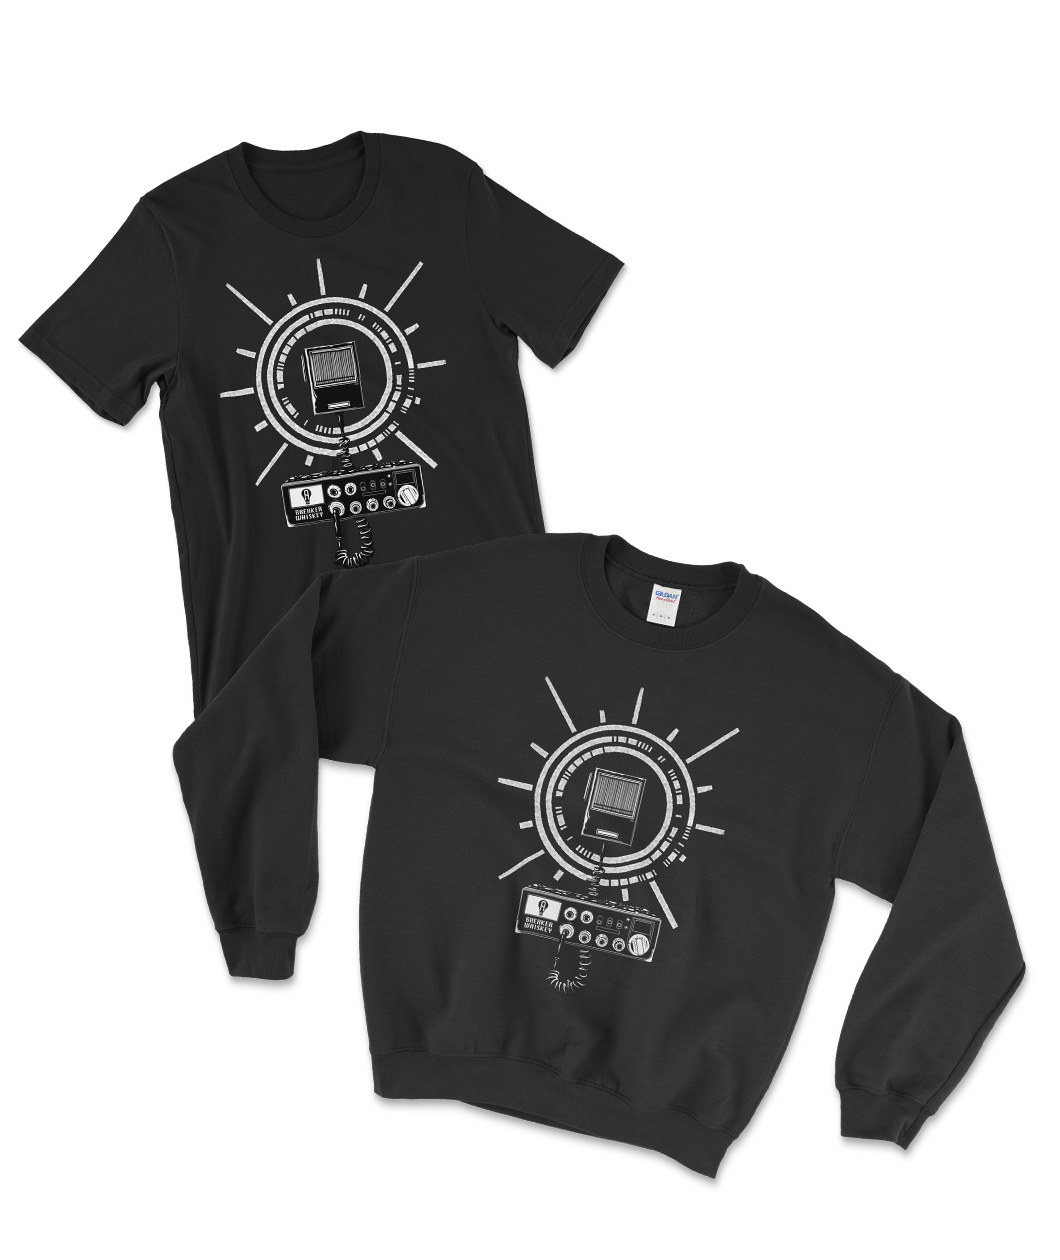 A black t-shirt and a black crewneck hoodie each with a white design on the front. From Atypical Artists. 